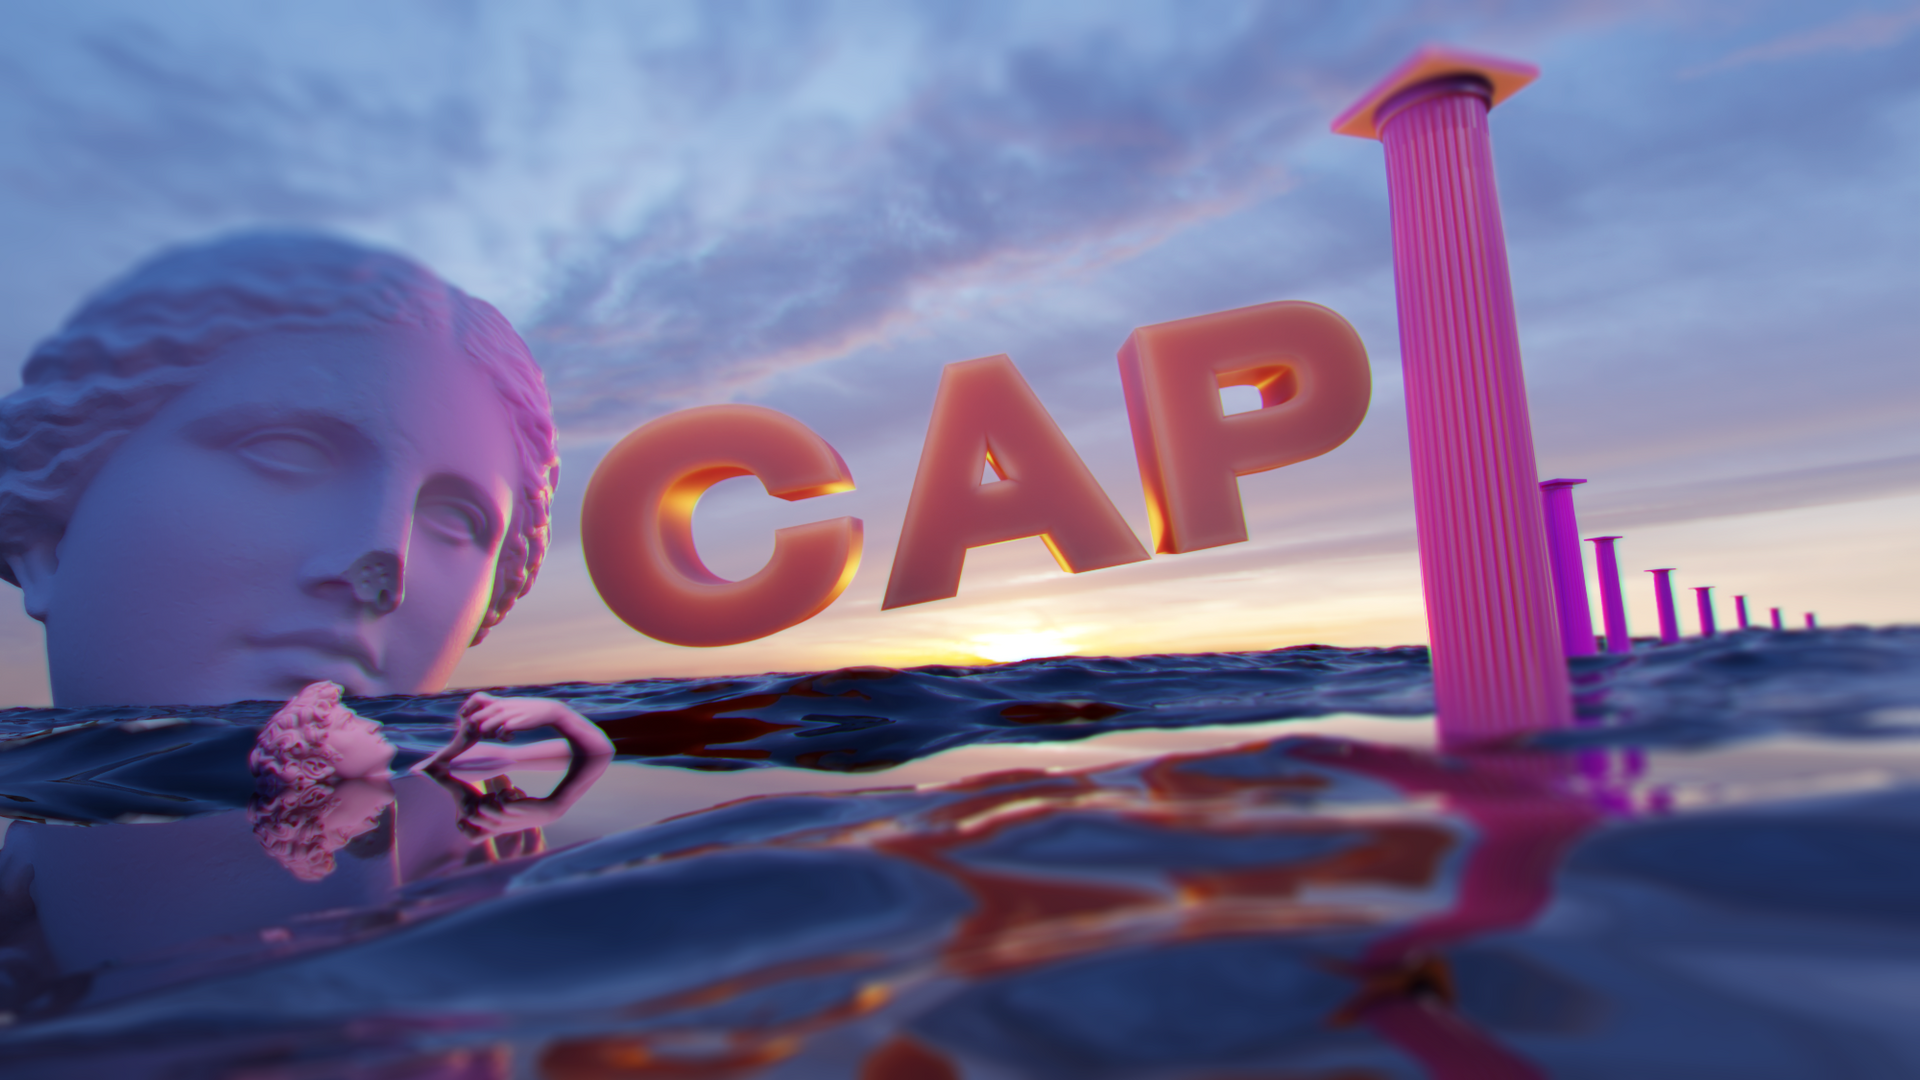 CAP in bold orange letters floating over a sea with greek sculptures